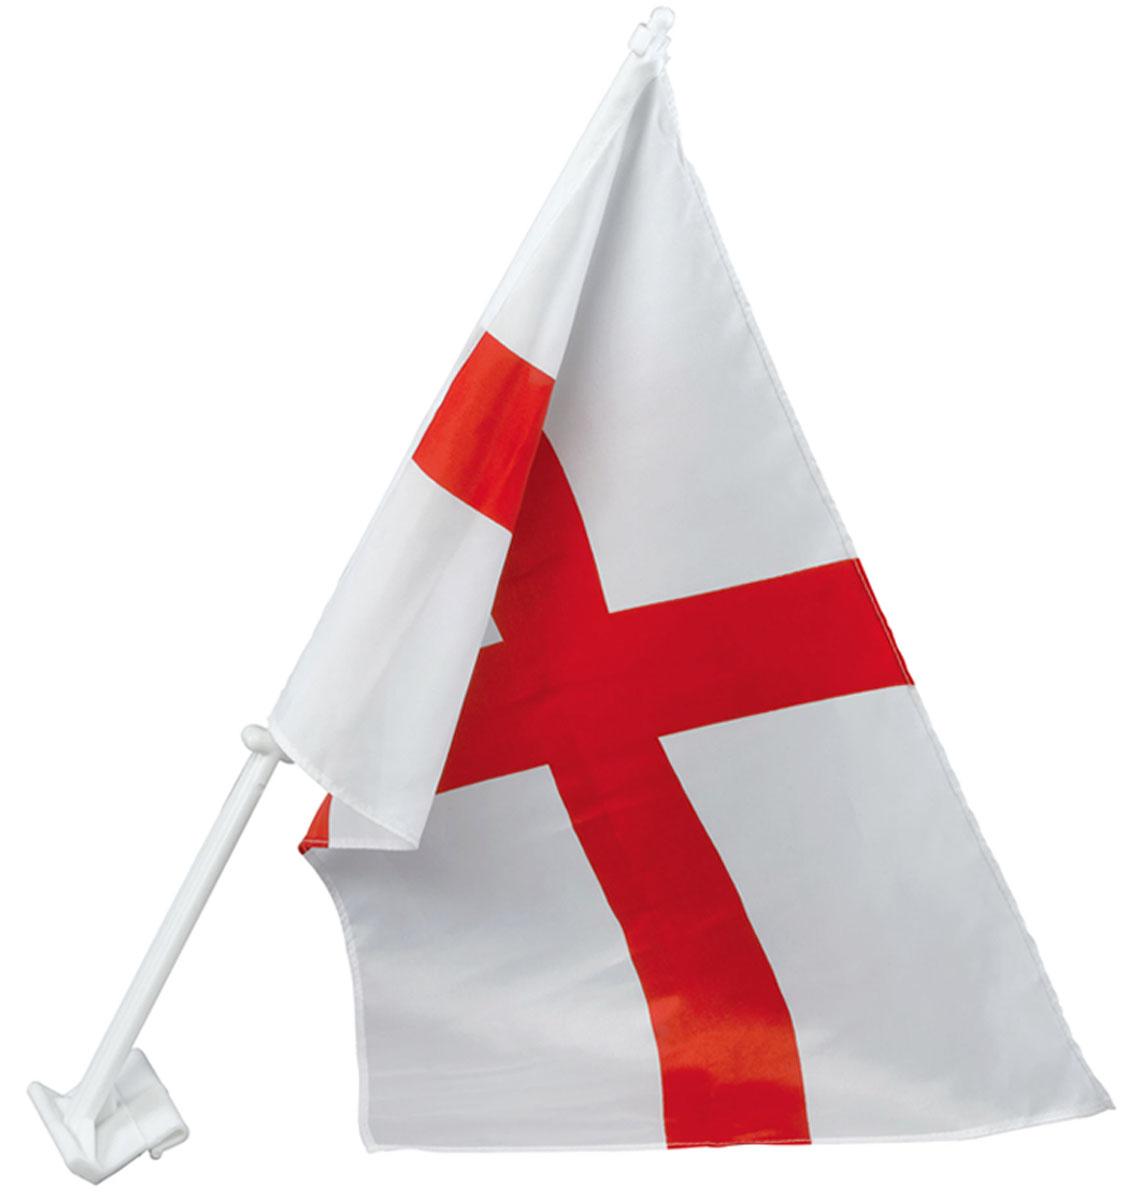 Pair of Flag of St George Car Flags 30x45cm by Bristol Novelty PG078 available here at Karnival Costumes online party shop